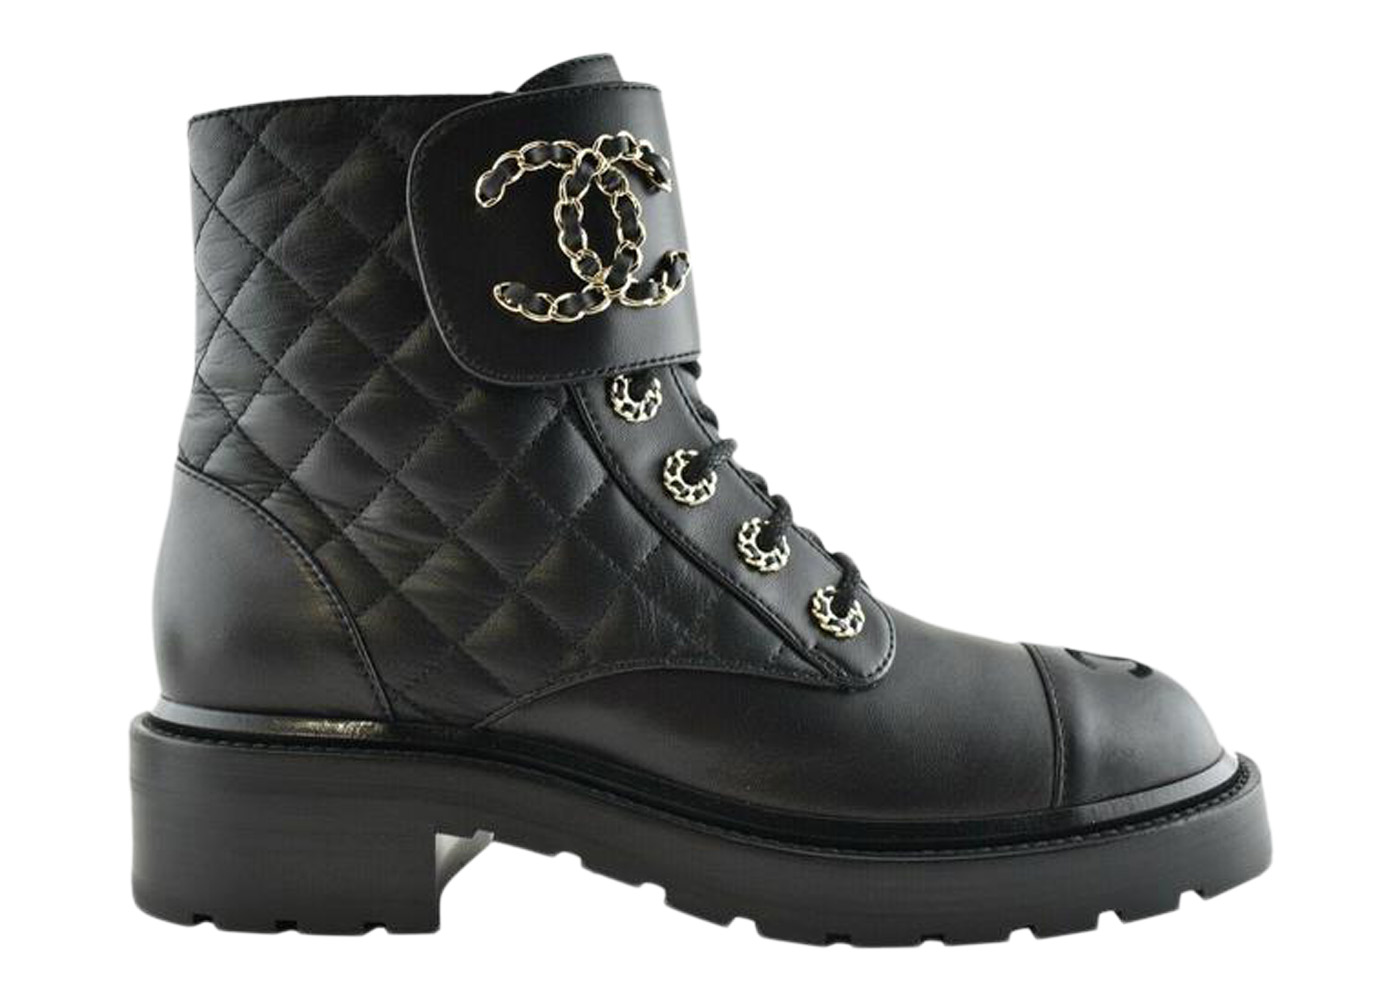 Chanel Boots Second Hand Chanel Boots Online Store Chanel Boots Outlet Sale UK  buysell used Chanel Boots fashion online